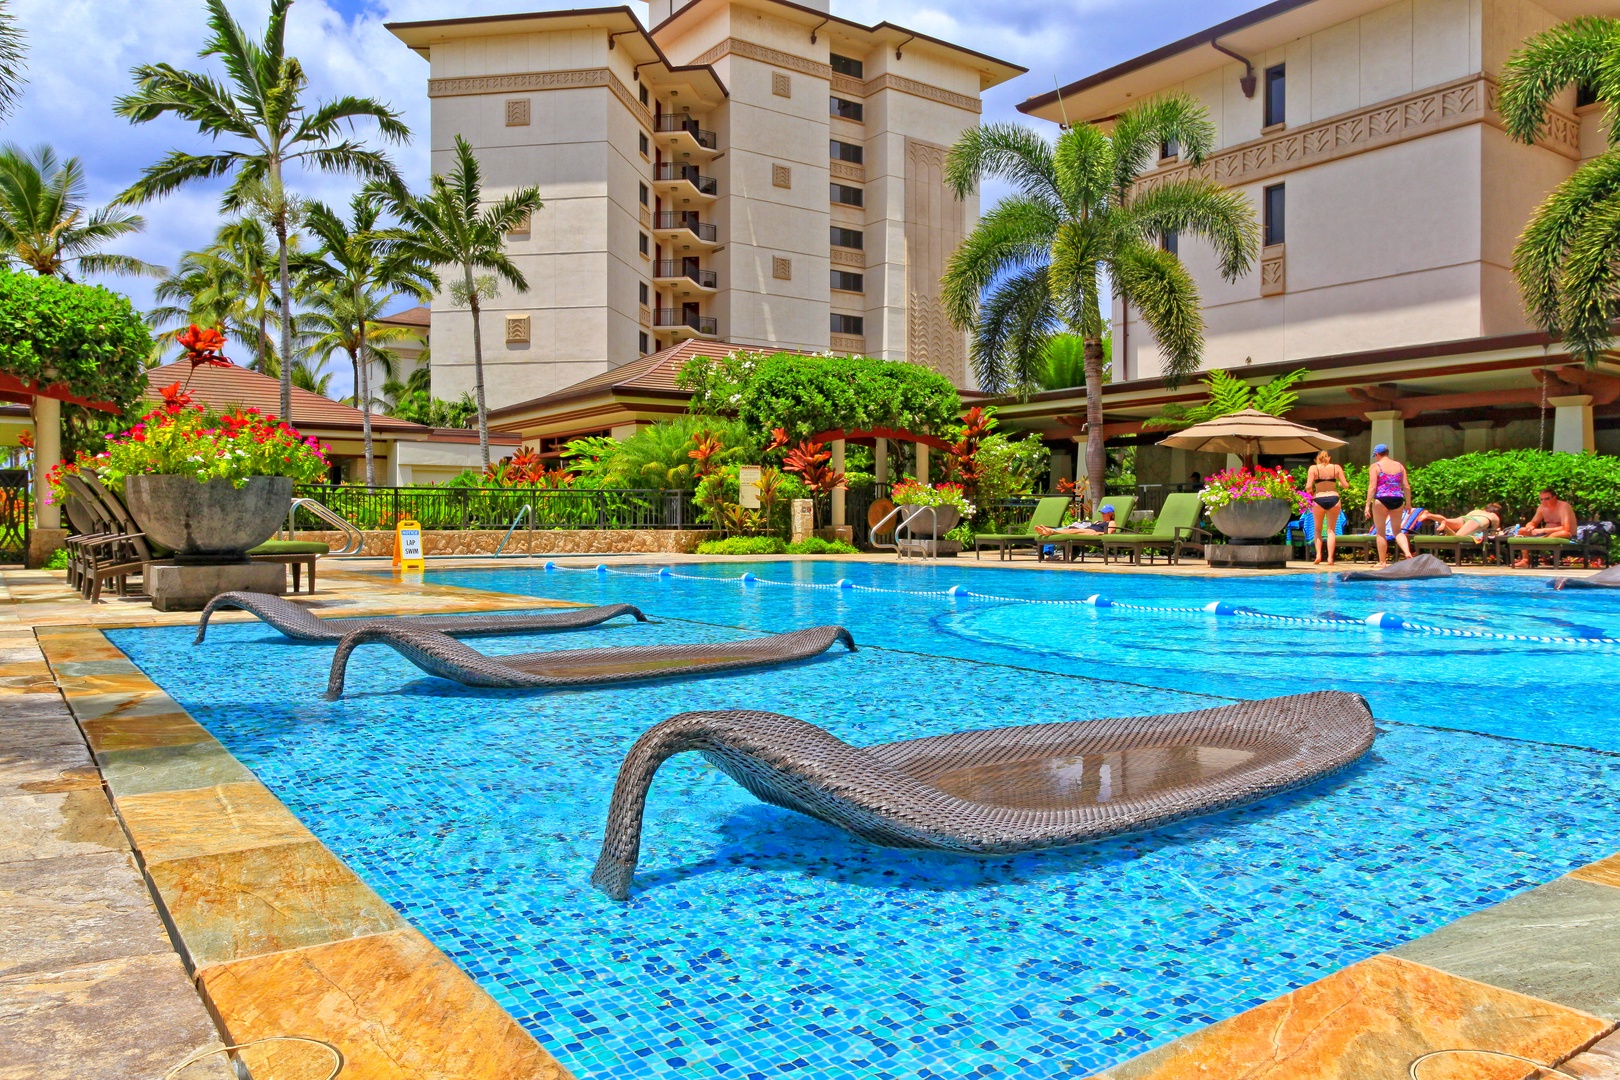 Kapolei Vacation Rentals, Ko Olina Beach Villas B403 - Water loungers for a relaxing day at the lap pool.